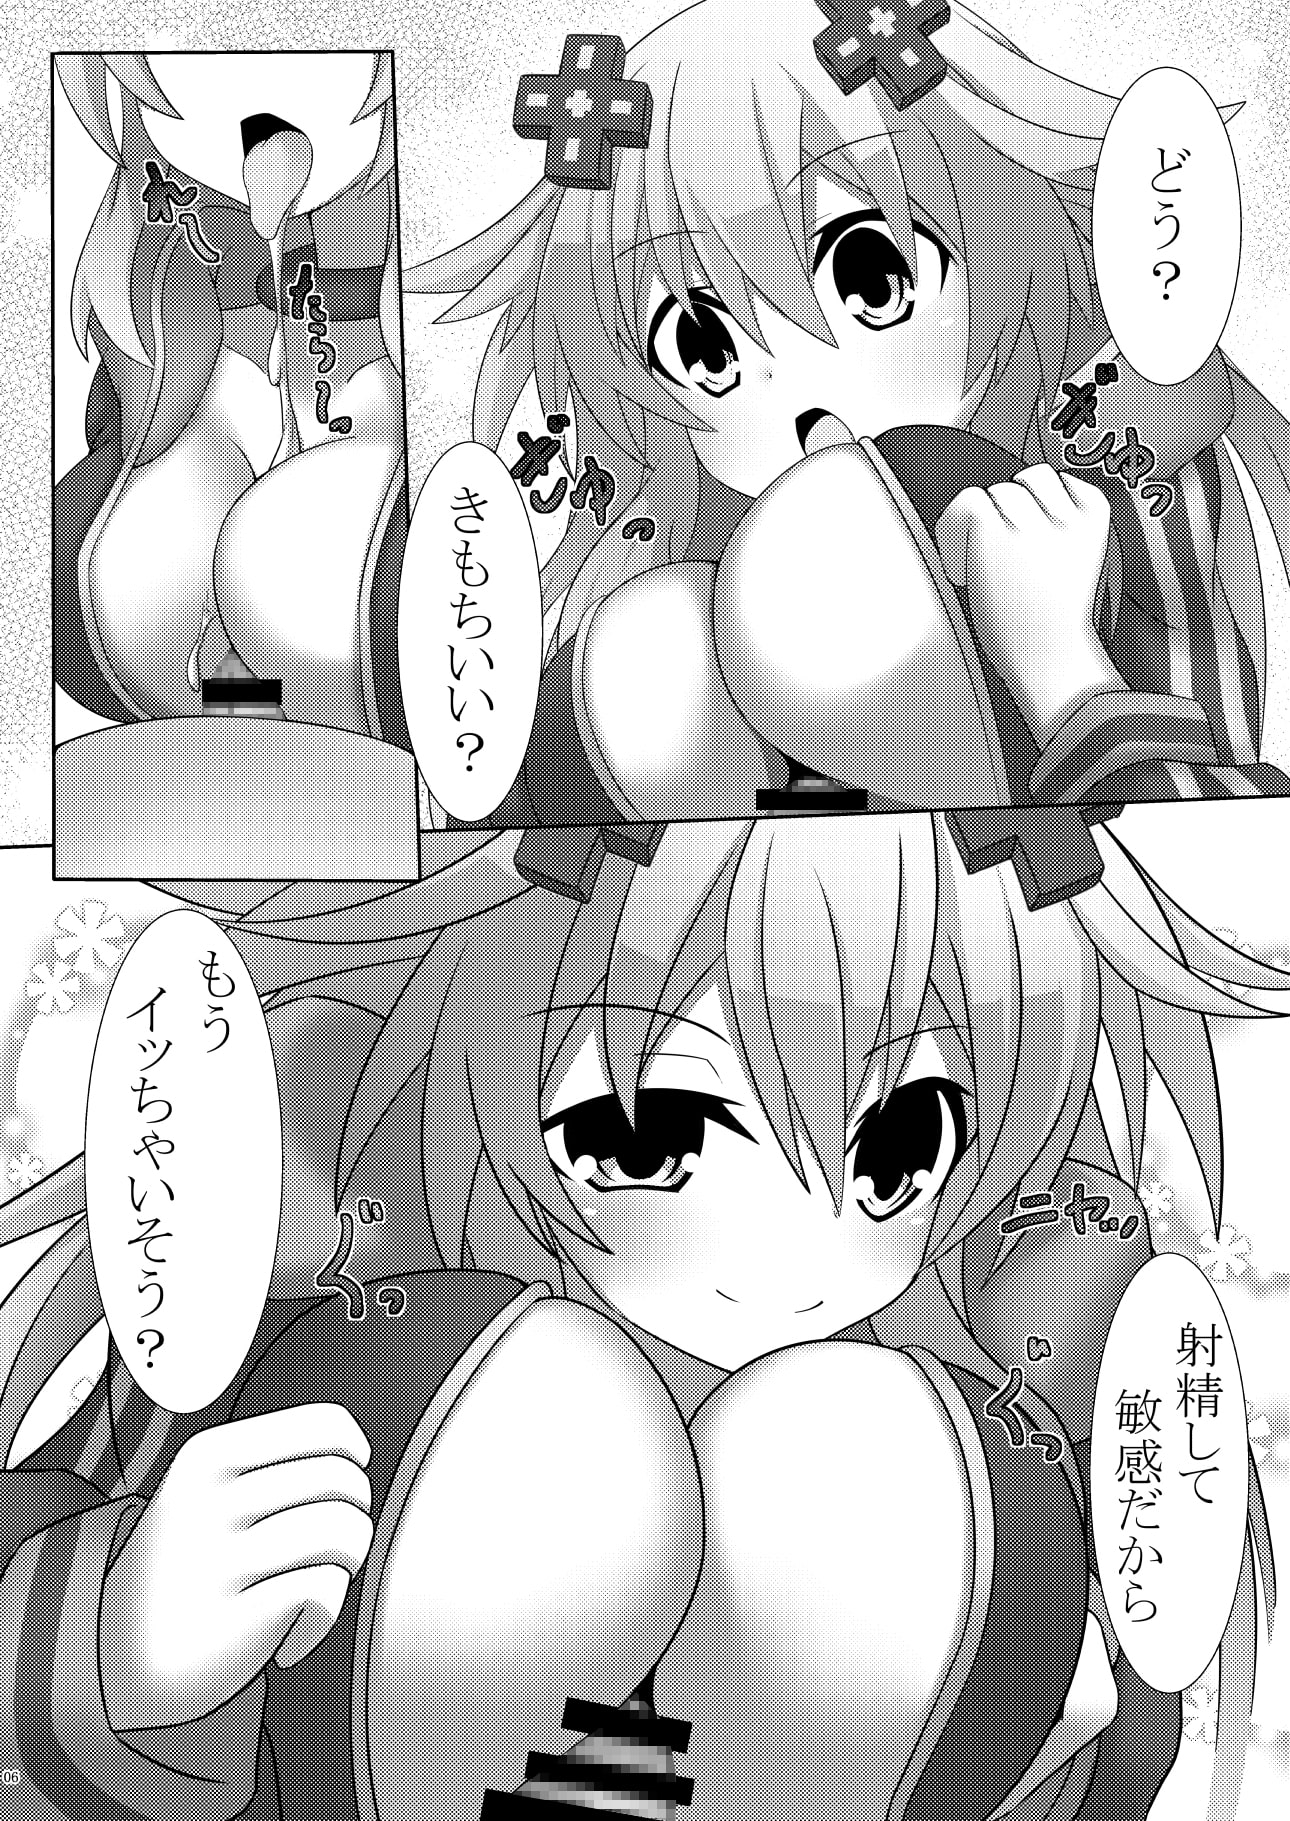 Daily Life with Nep x 2